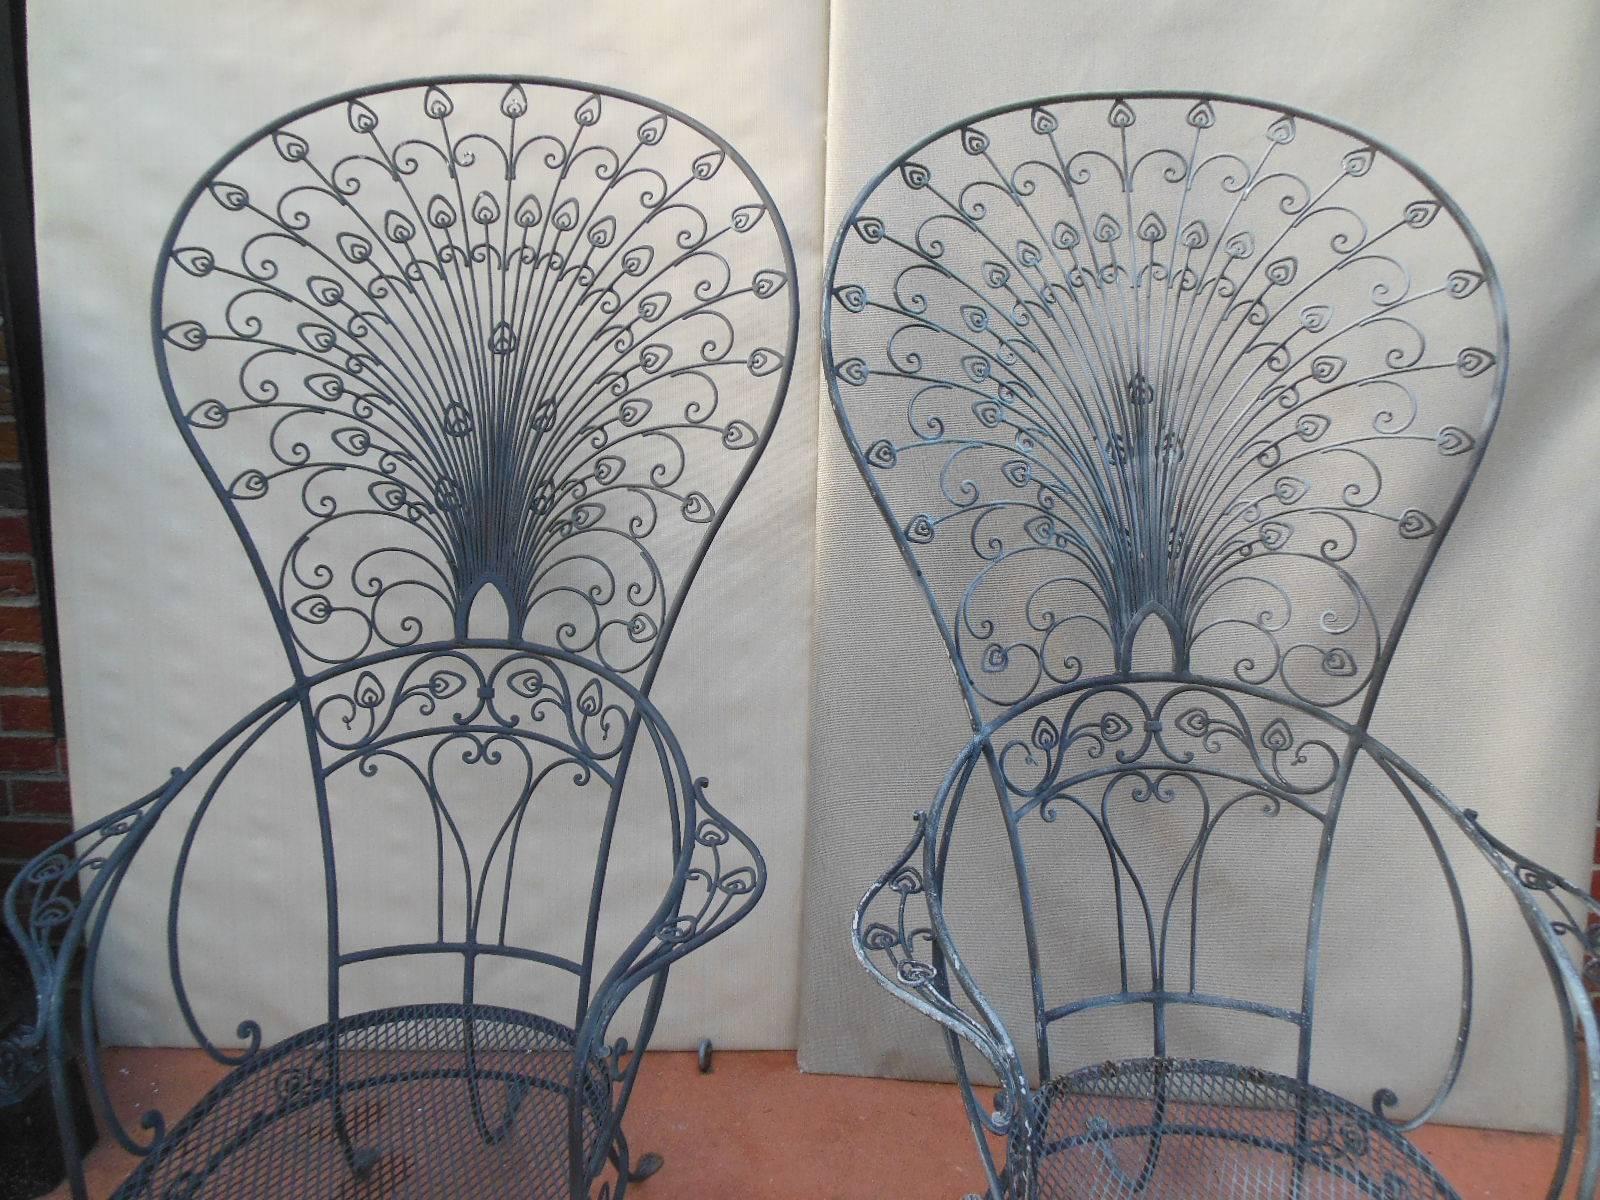 A pair of wrought iron Peacock Chairs by John Salterini. These elaborate wrought iron chairs are the best example of the craftsmanship of Salterini who was the premier manufacturer of wrought iron furniture in New York City in the 2nd quarter of the